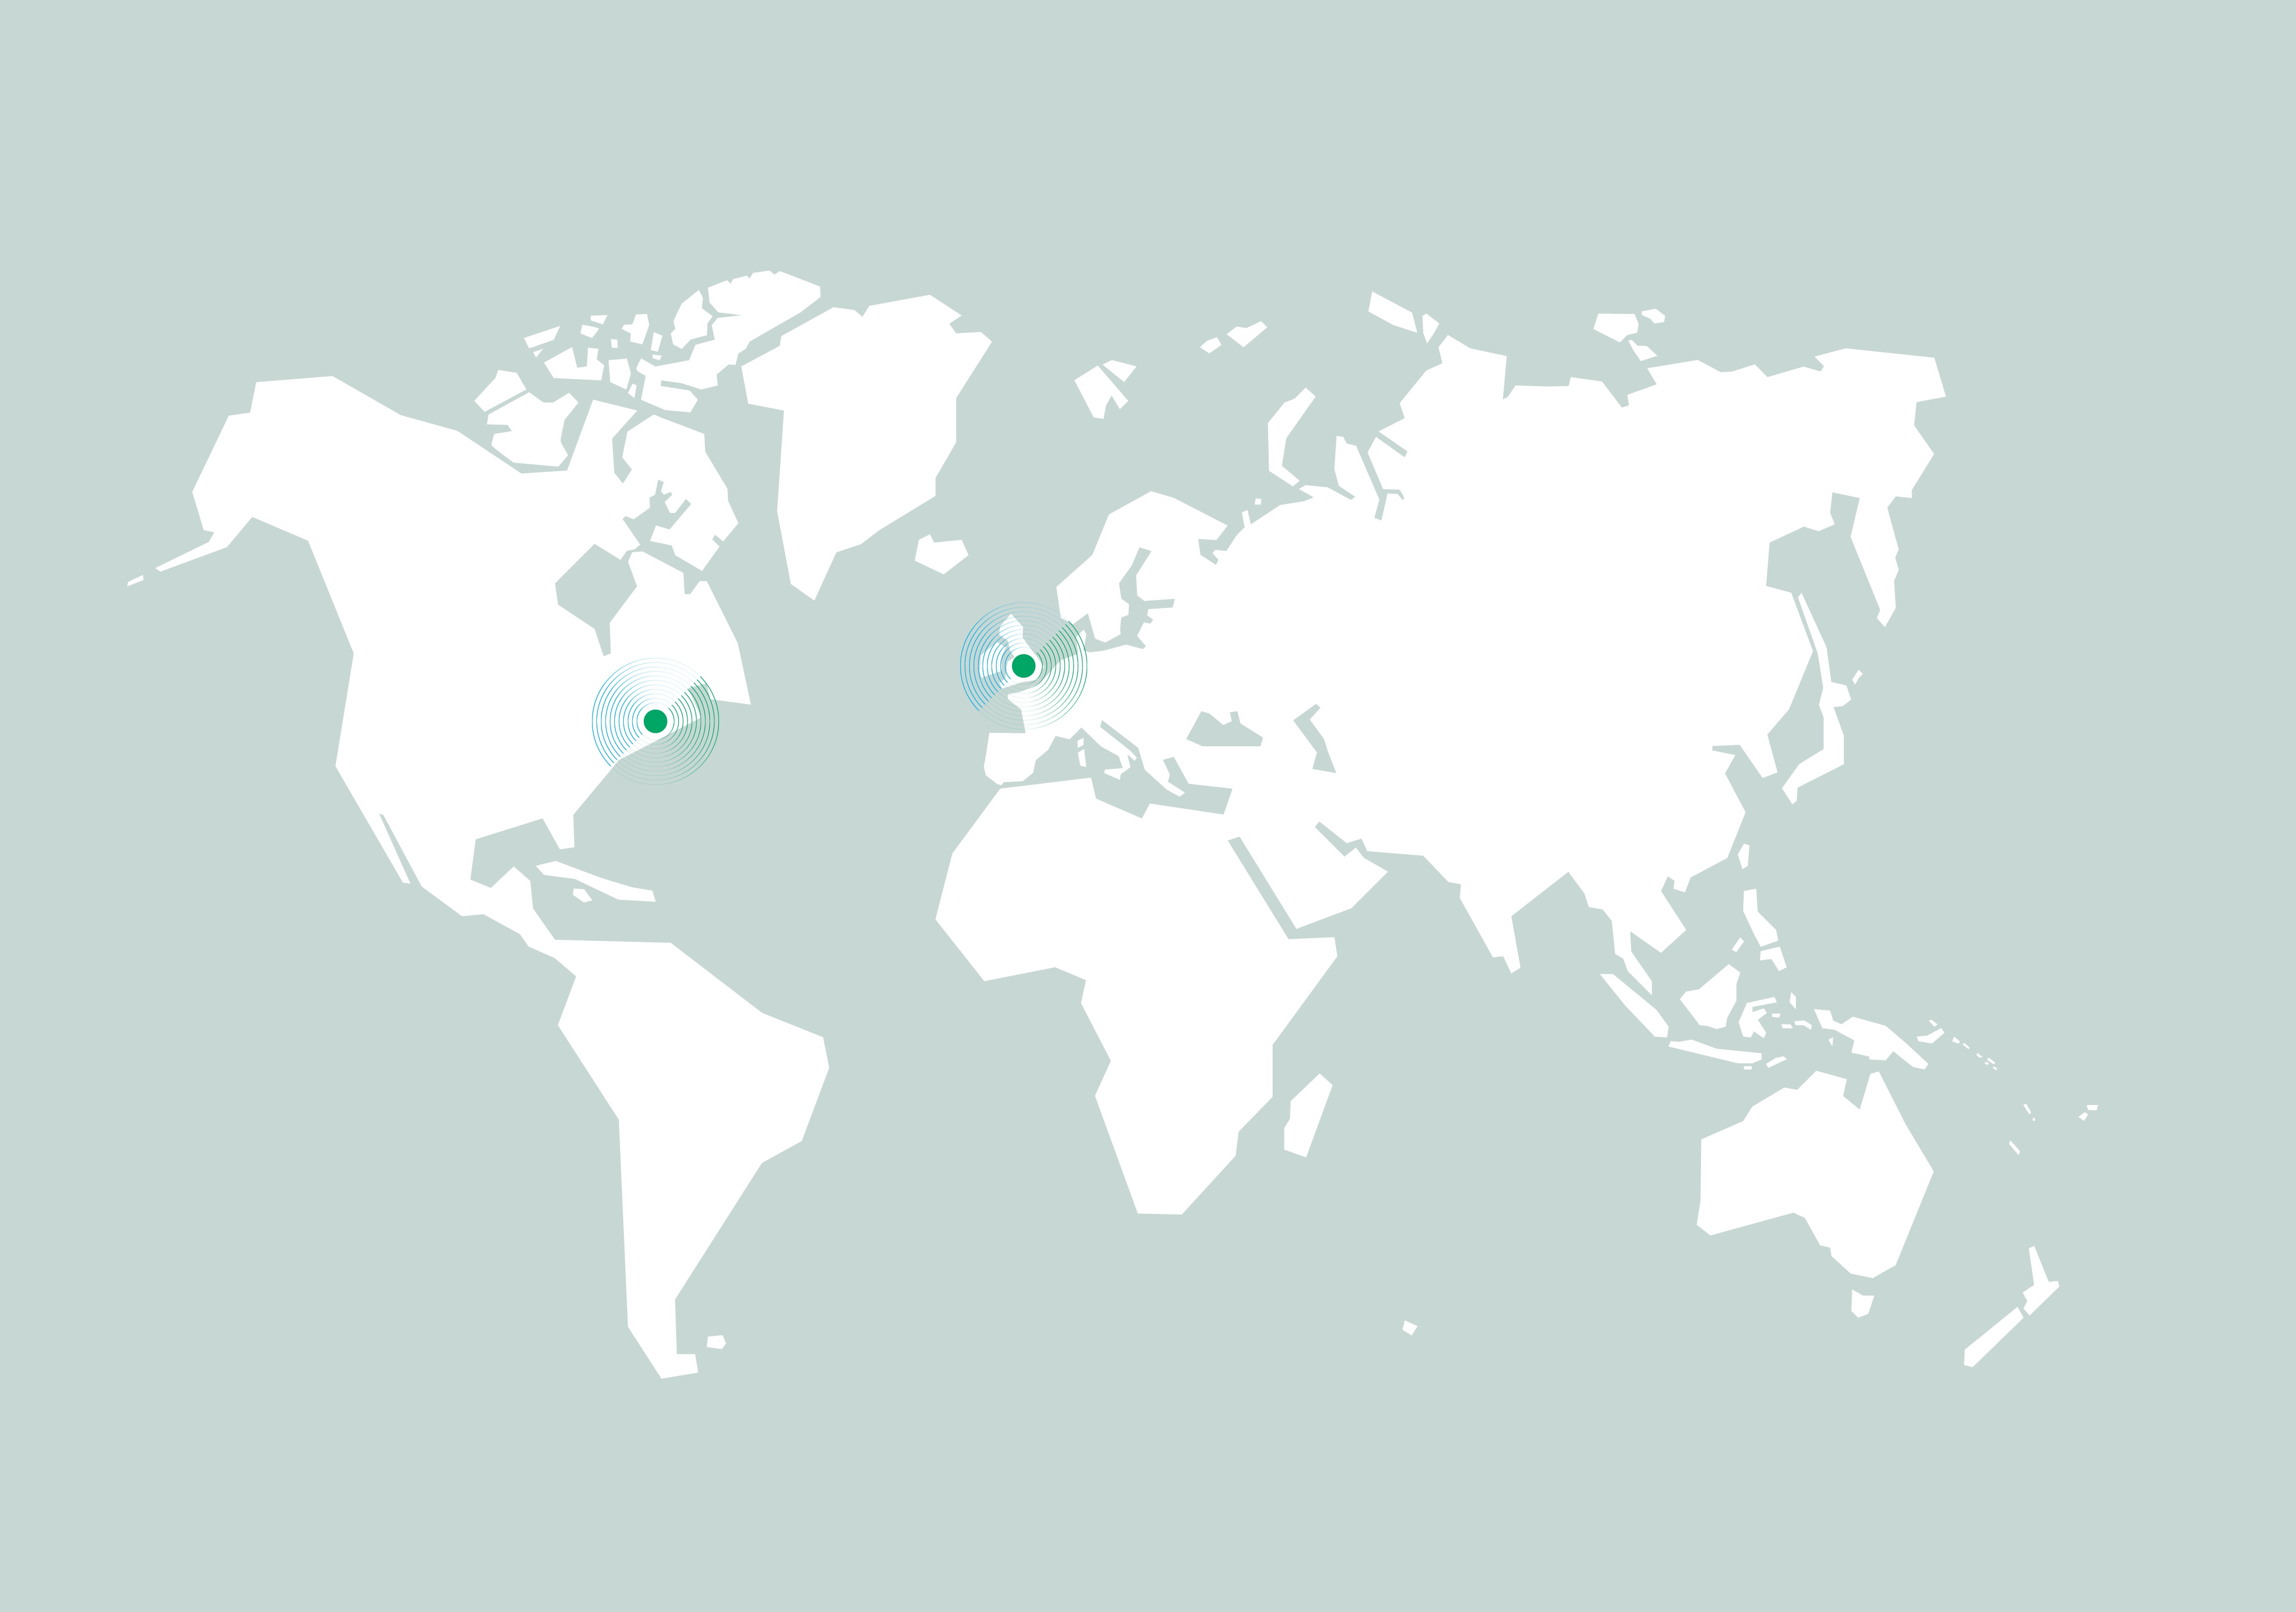 A map with green dots representing the Risilience offices